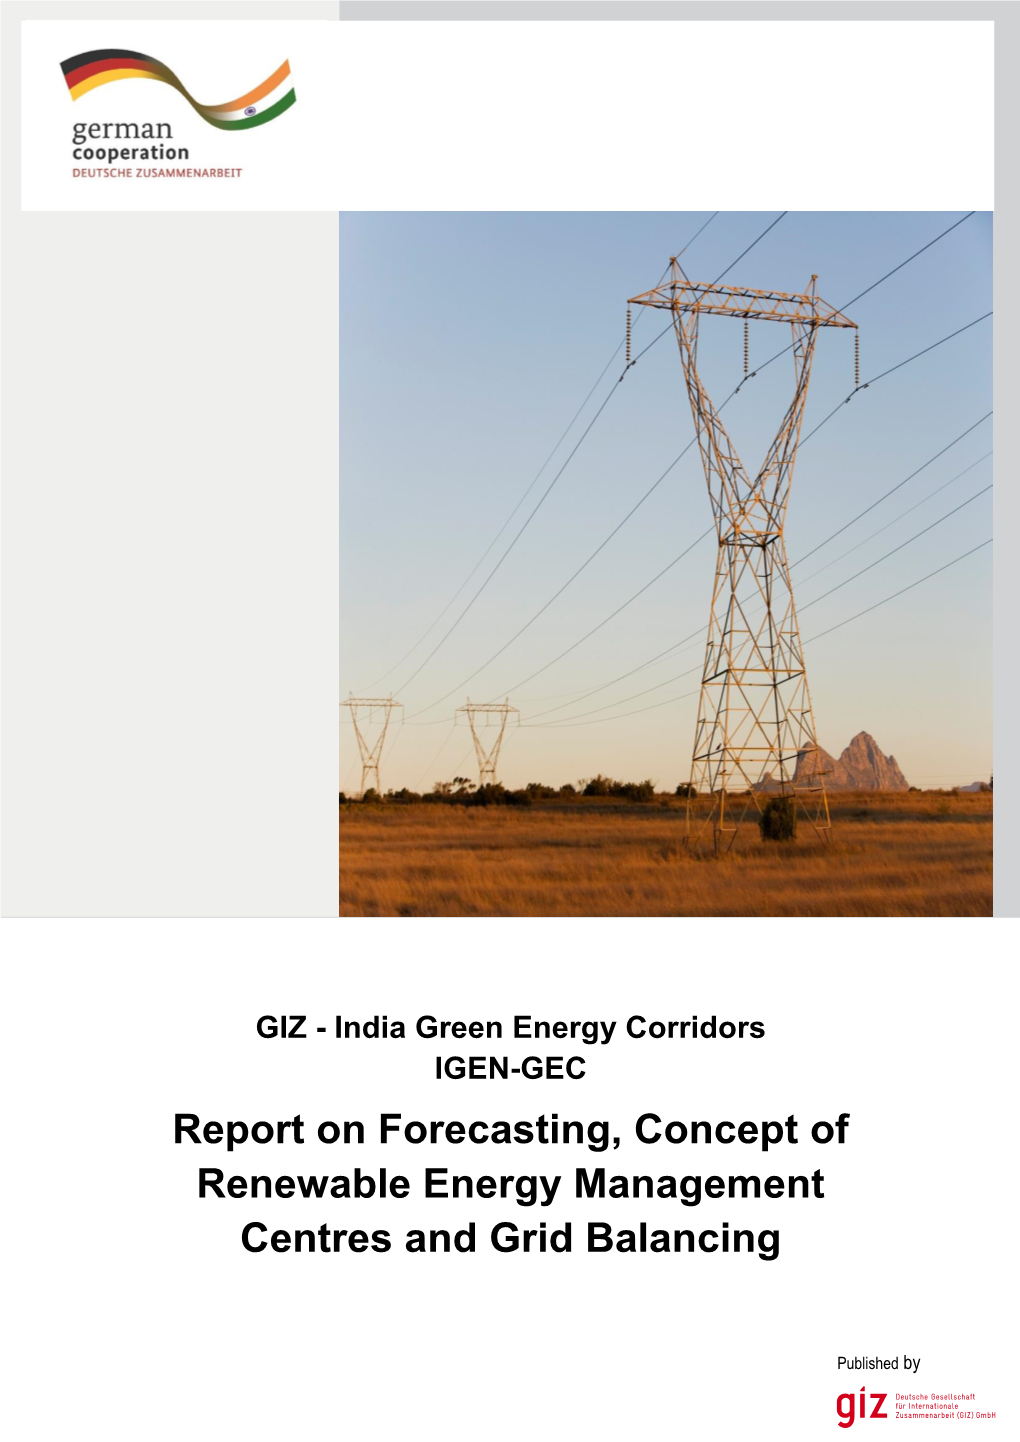 Report on Forecasting, Concept of Renewable Energy Management Centres and Grid Balancing